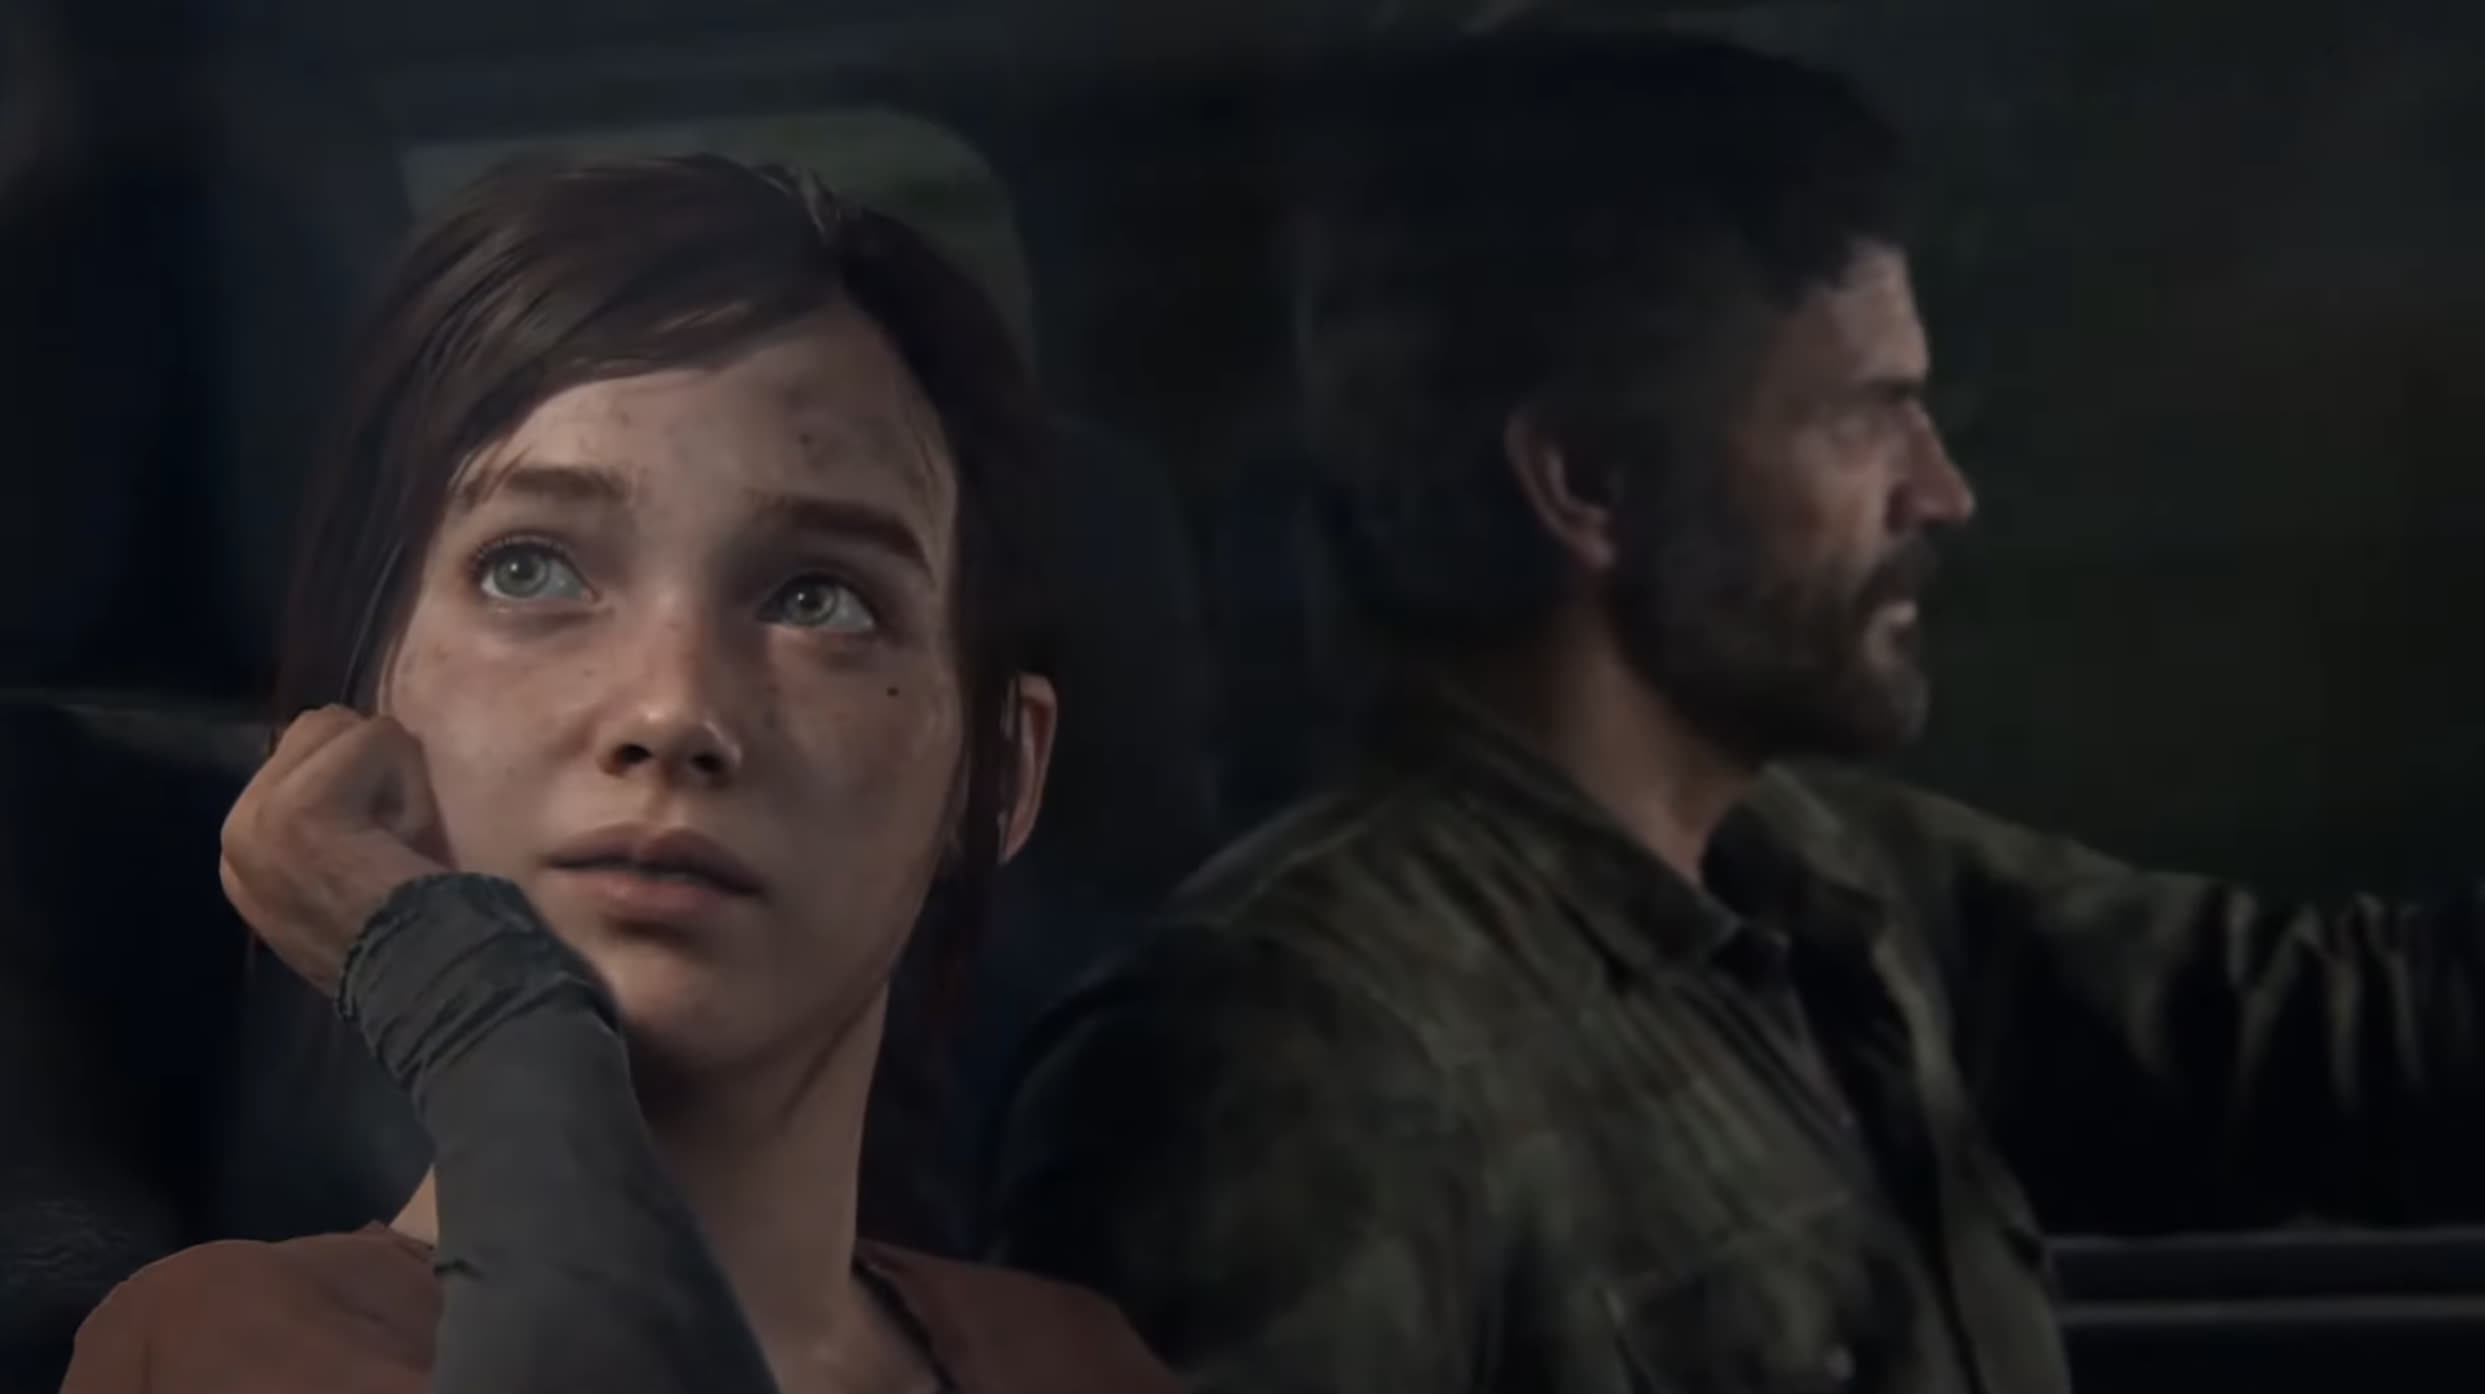 Naughty Dog spills the dirt on 'The Last of Us' coming to PS5 and PC